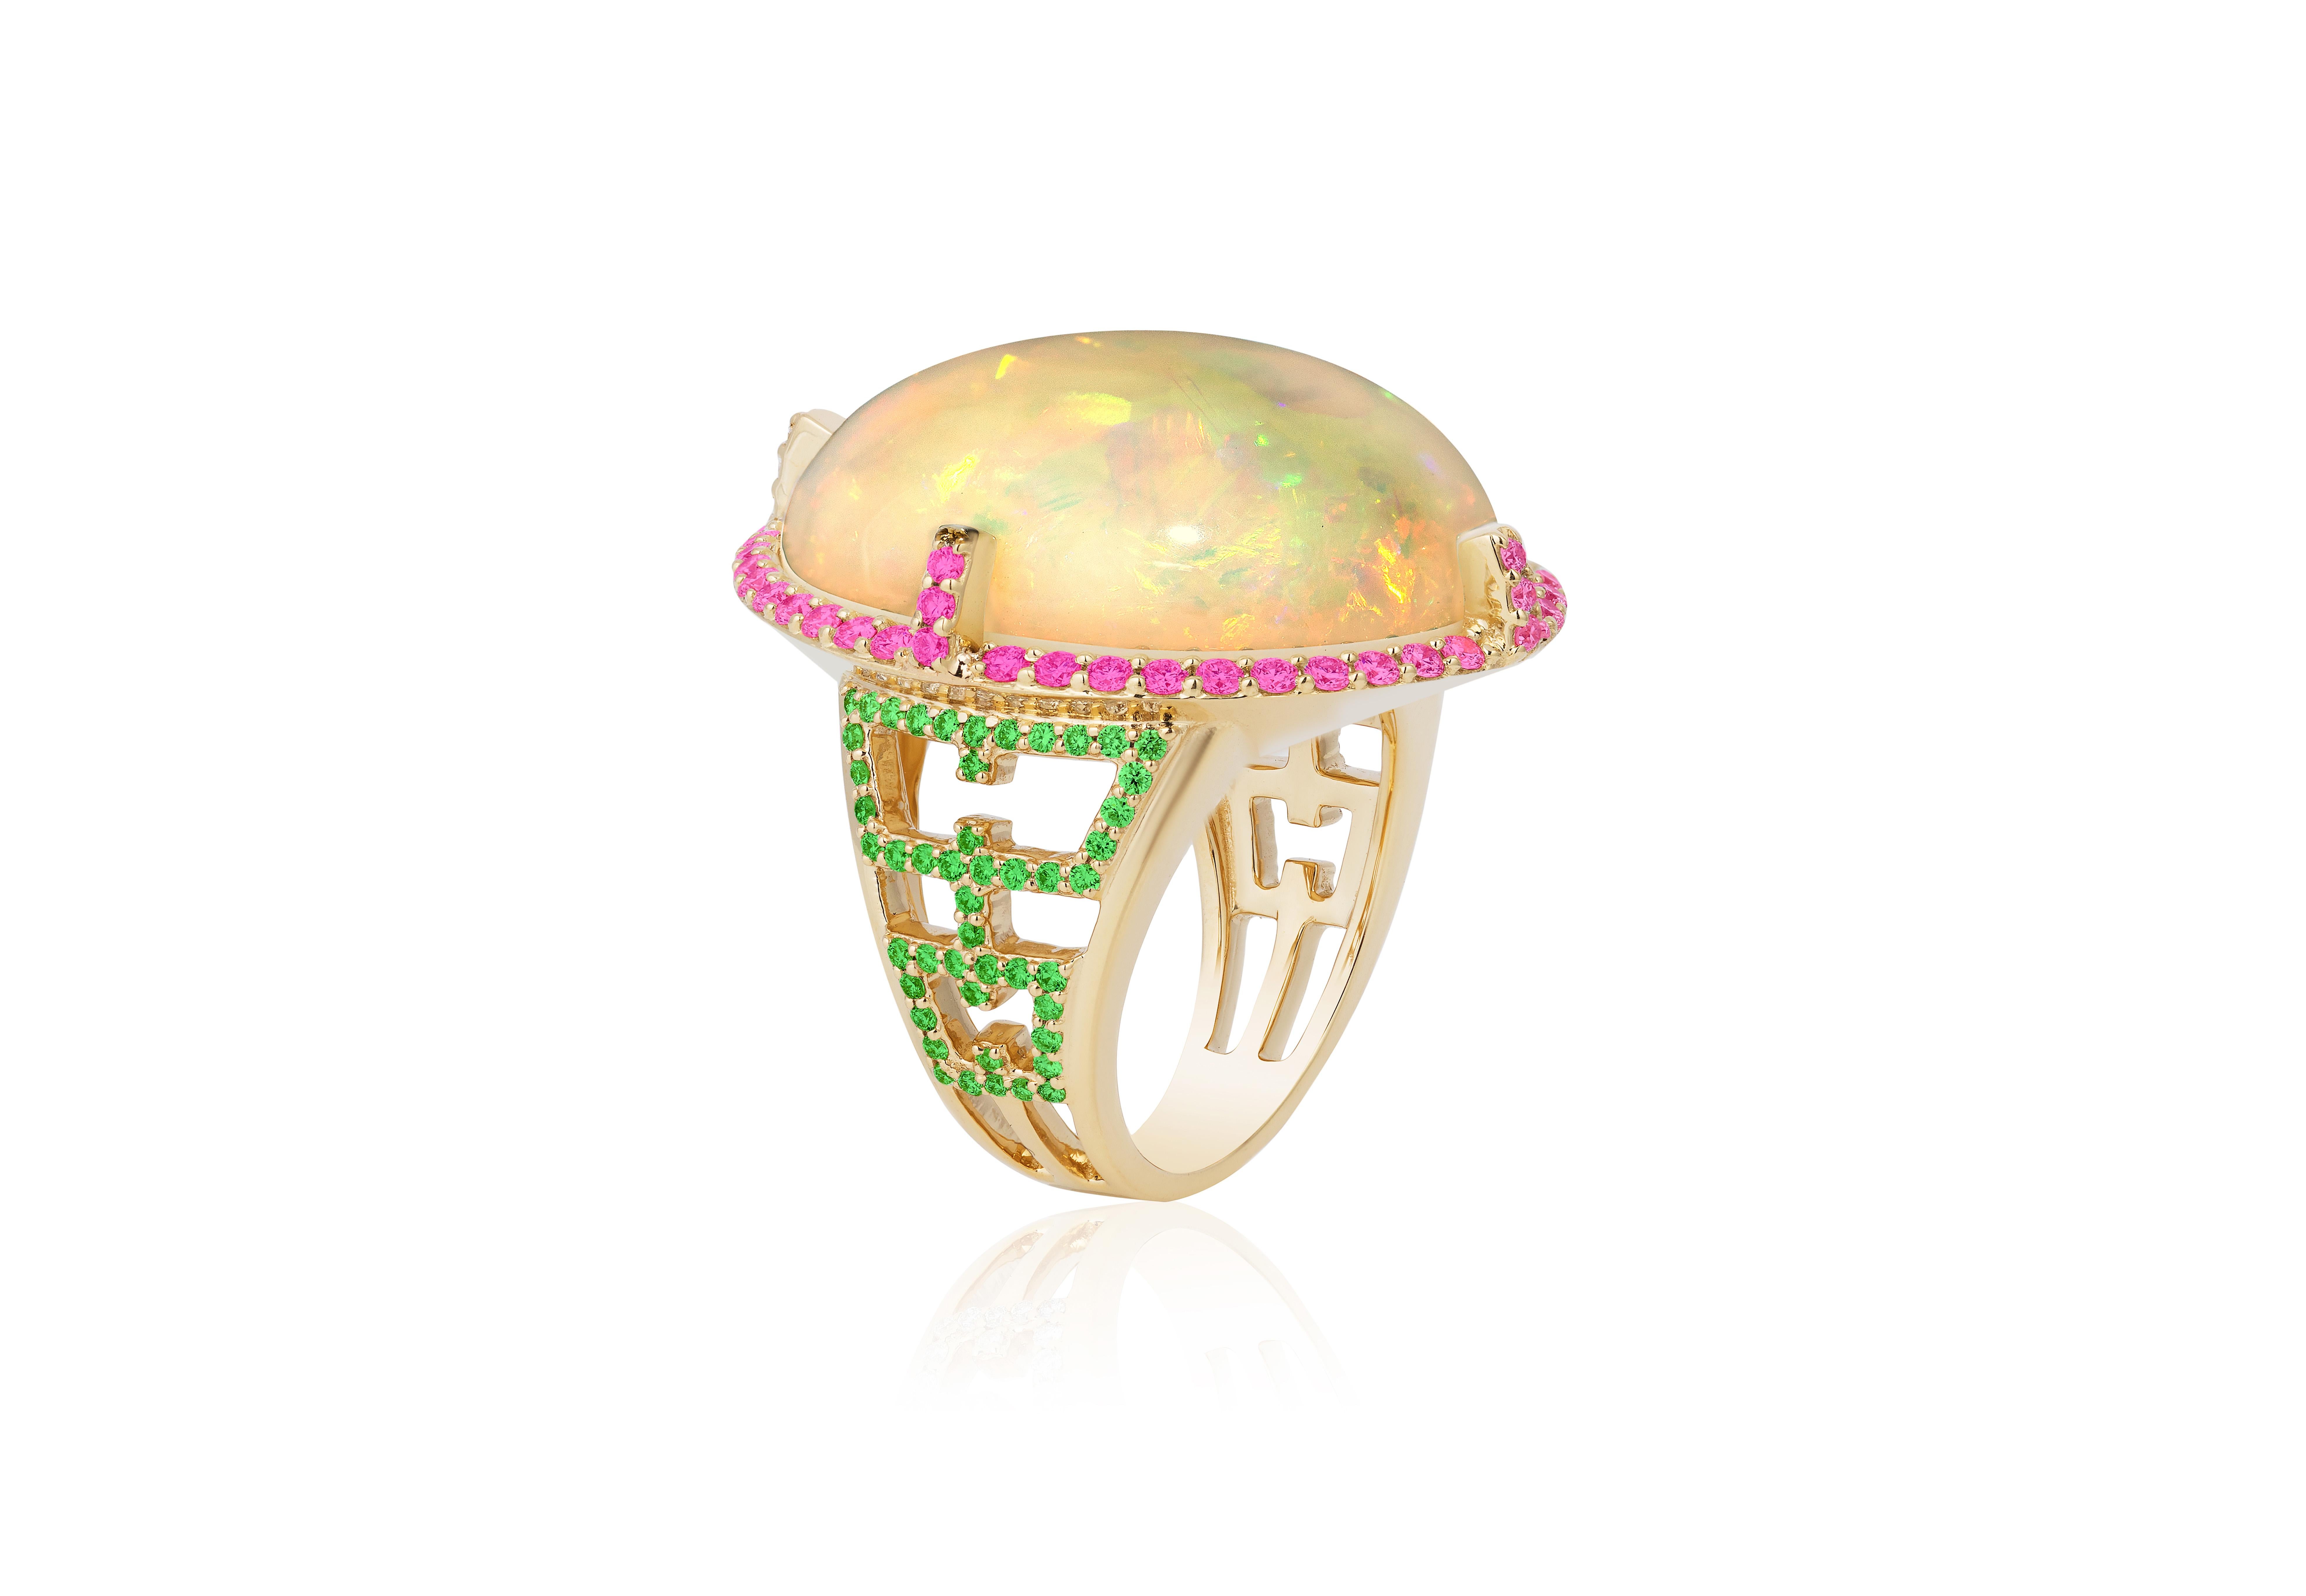 Pinkish Opal Ring with Tsavorites, Pink Sapphires & Diamonds in 18k Yellow Gold, from 'G-One' Collection

Stone Size: 24 x 18 mm

Gemstone Weight: 26.19 Carats